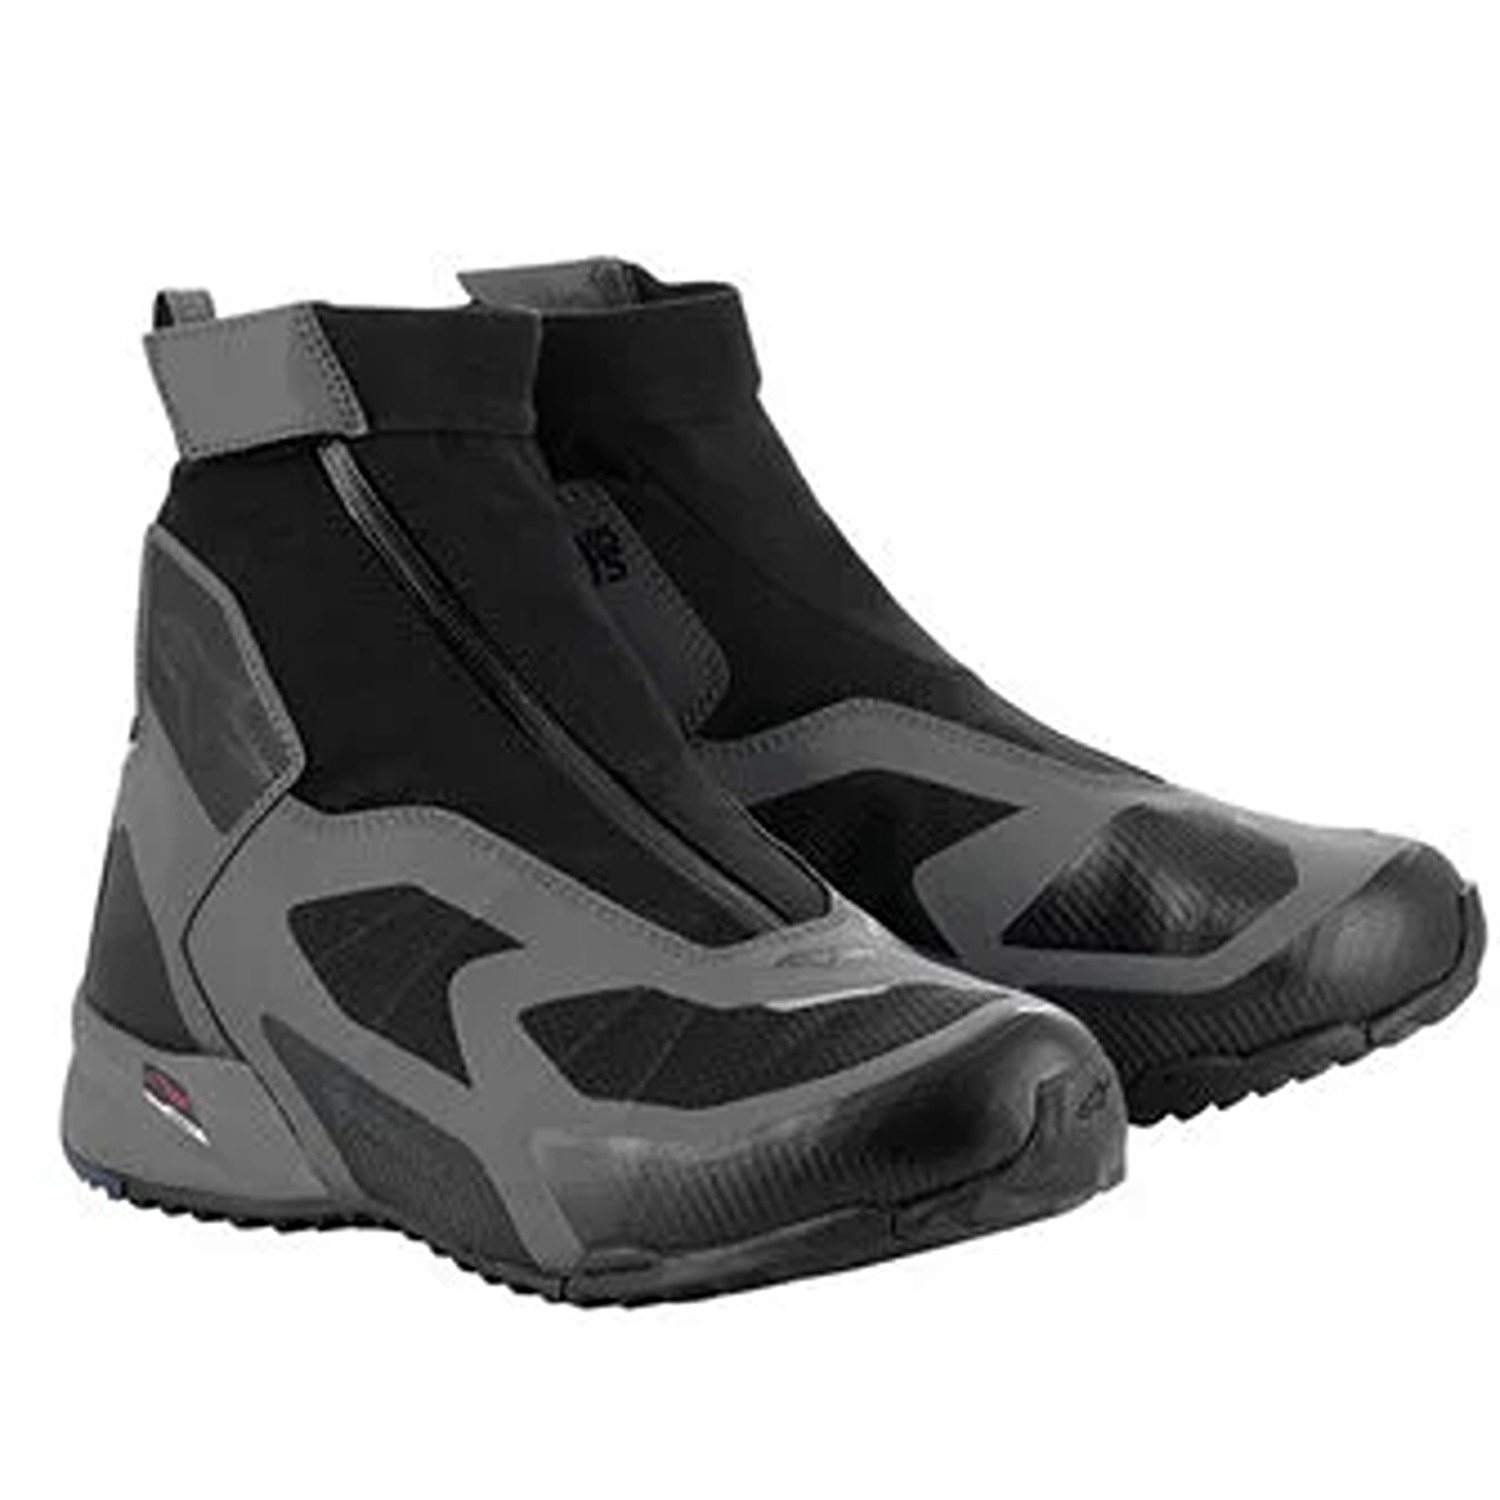 Image of Alpinestars CR-8 Gore-Tex Shoes Black Mid Gray Bright Red Size US 75 ID 8059347260150